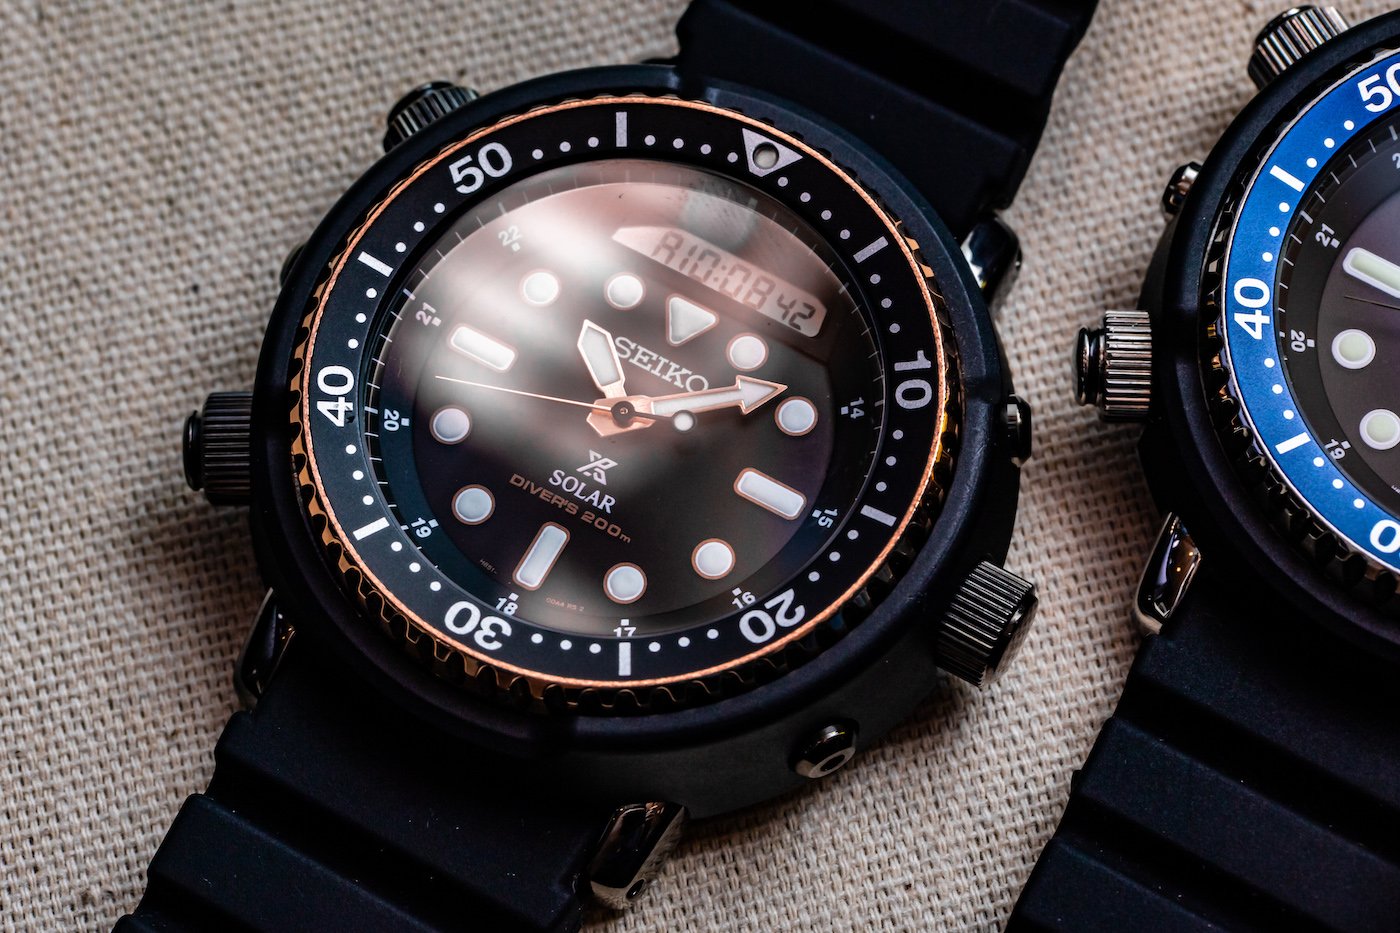 Hands-On With The Reissued Seiko Solar 'Arnie' Prospex SNJ025 & SNJ027  Watches | aBlogtoWatch